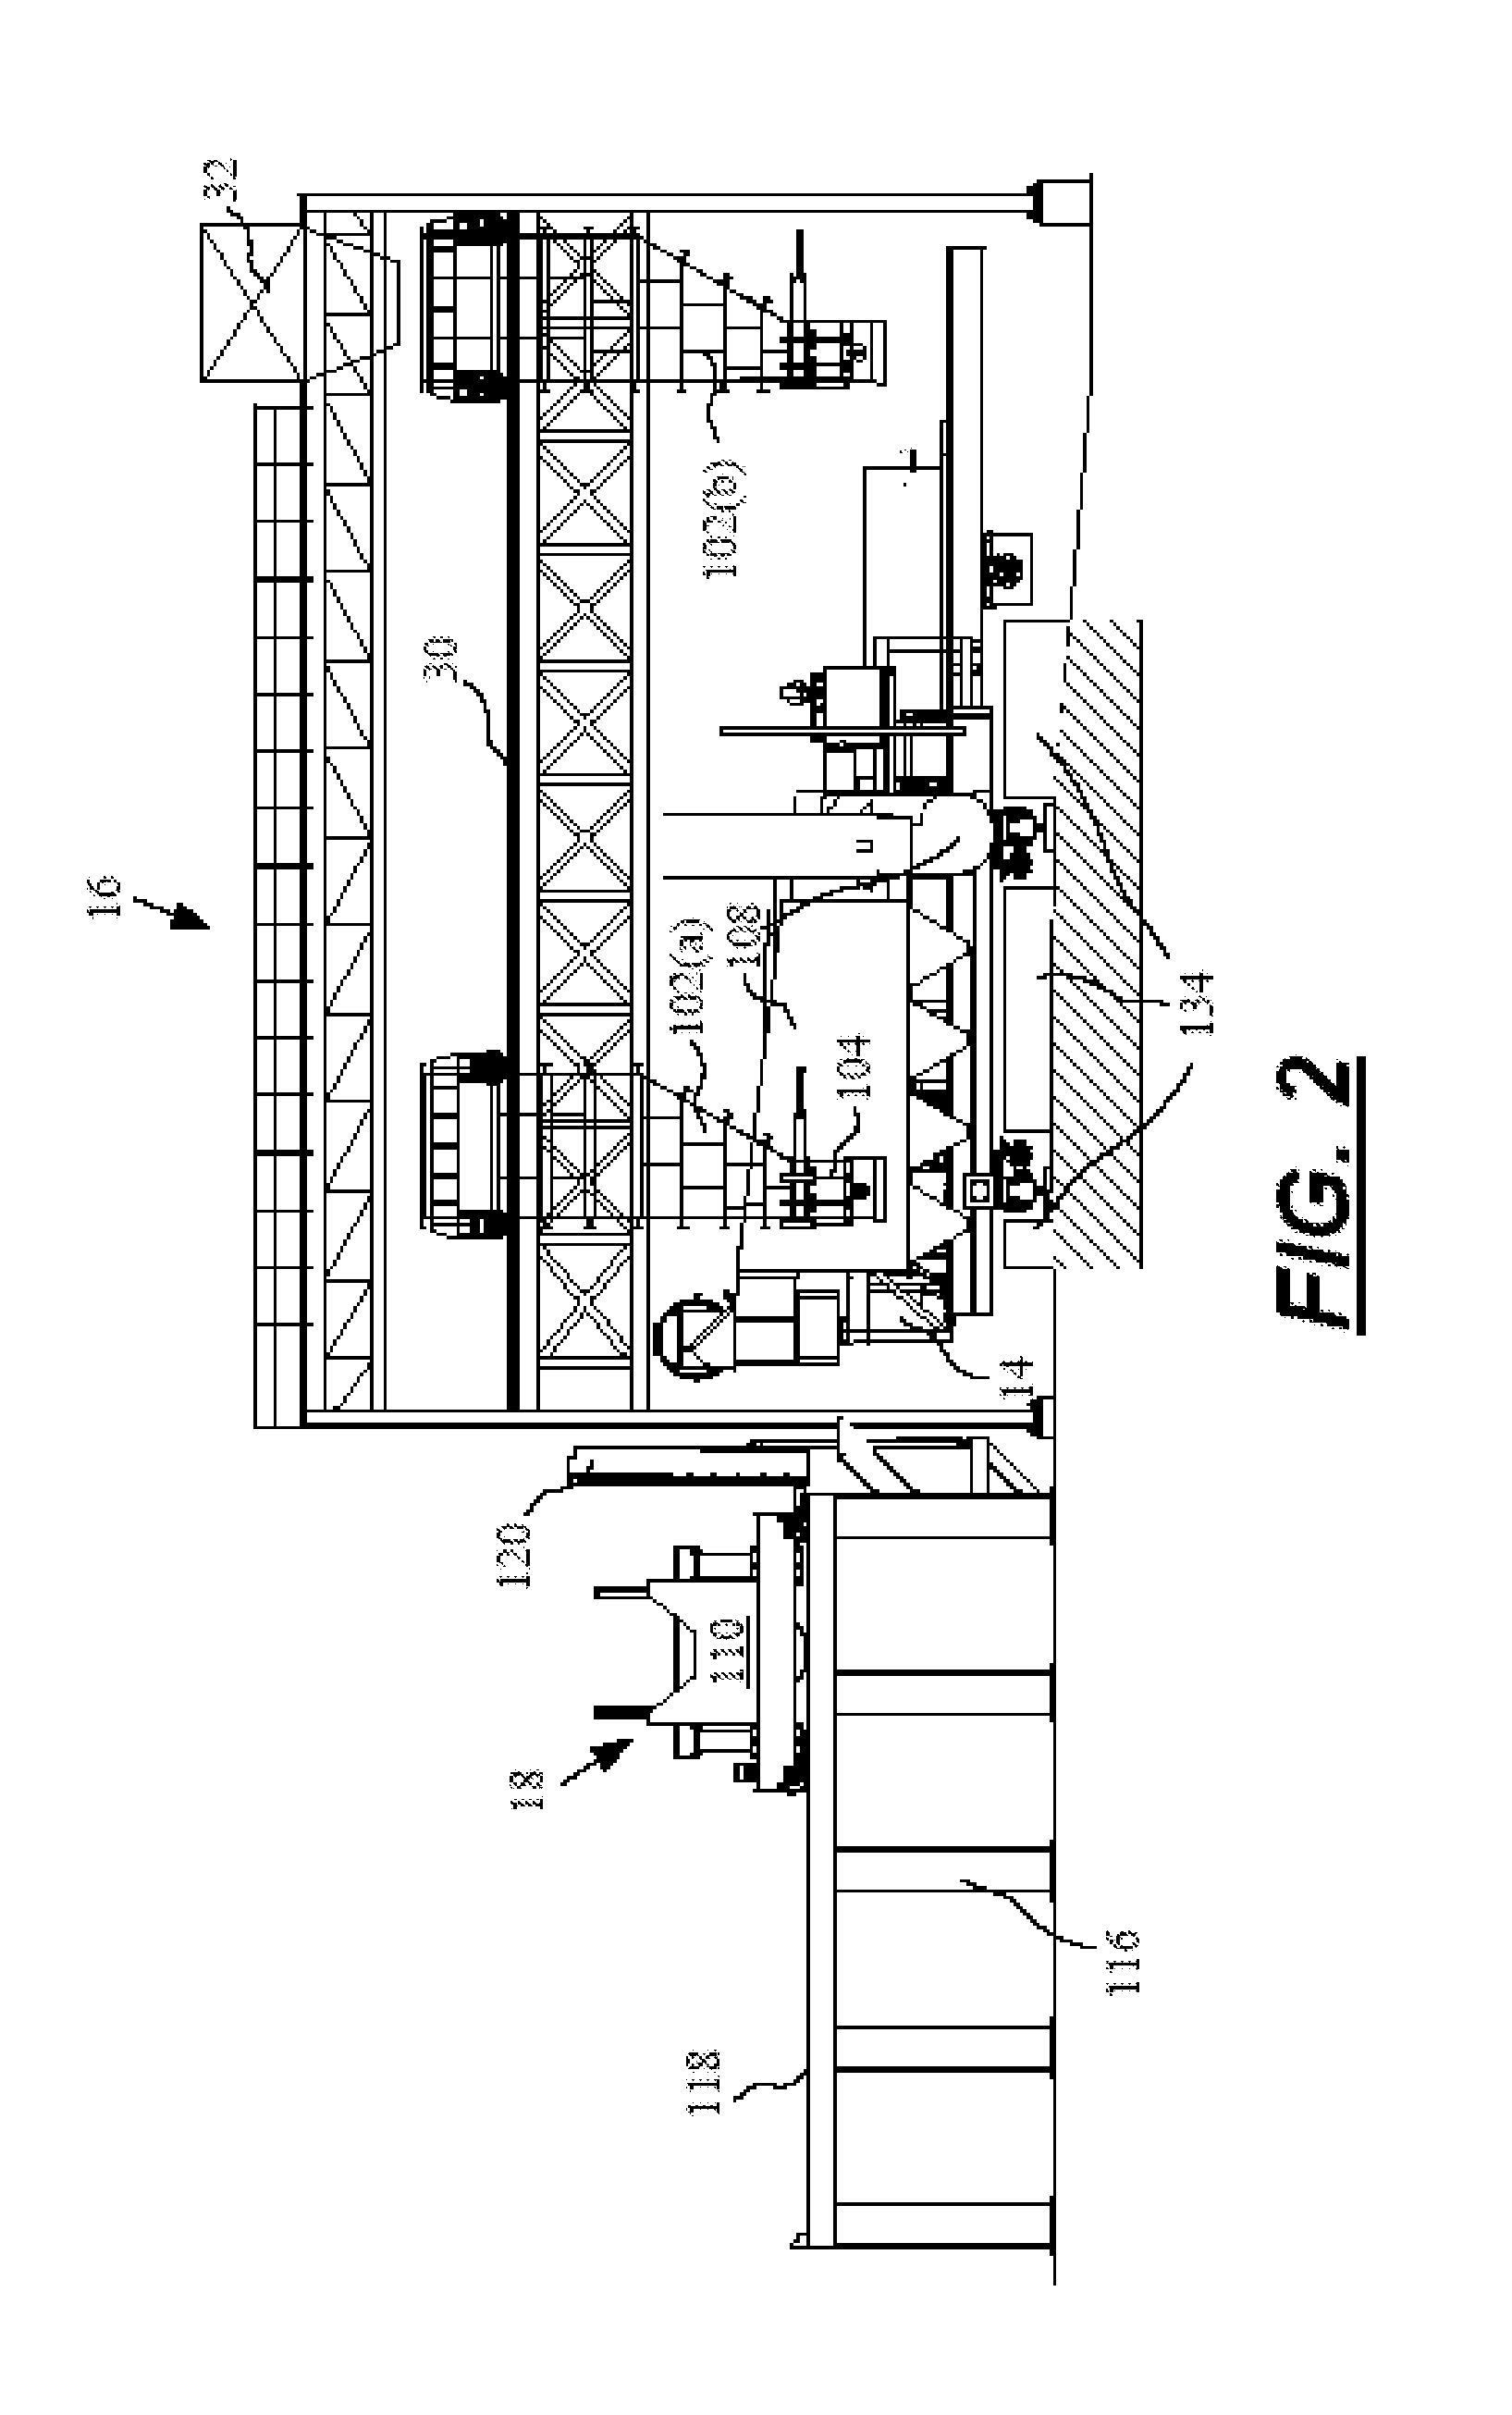 Method and apparatus for compacting coal for a coal coking process